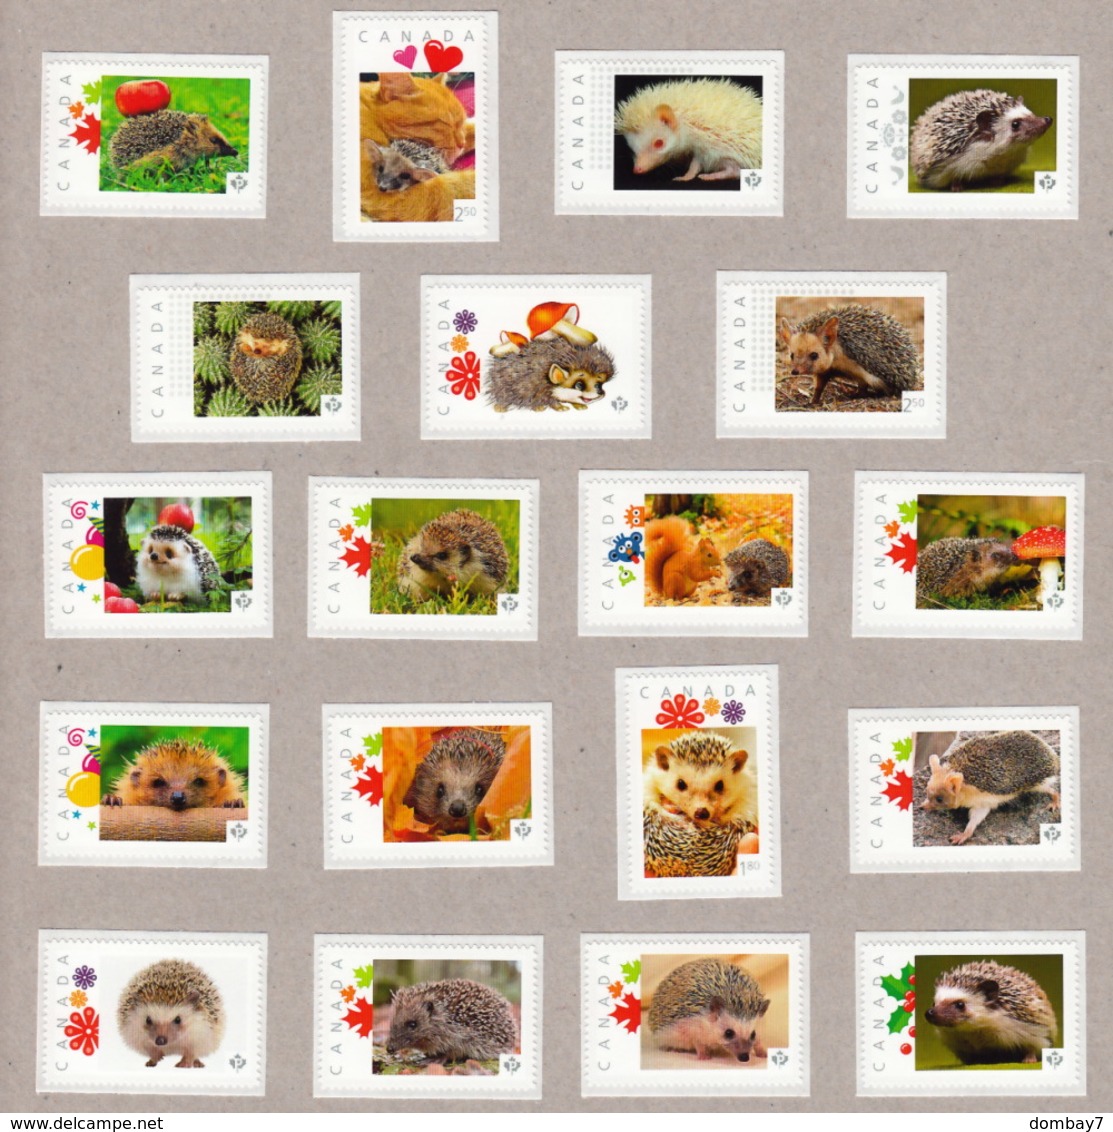 HEDGEHOG, ERIZO, RICCIO, IGEL, Hérisson MNH Stamps LIMITED! ONLY 2 Collection Available! ONLY HERE! Canada 2014-2015 - Knaagdieren